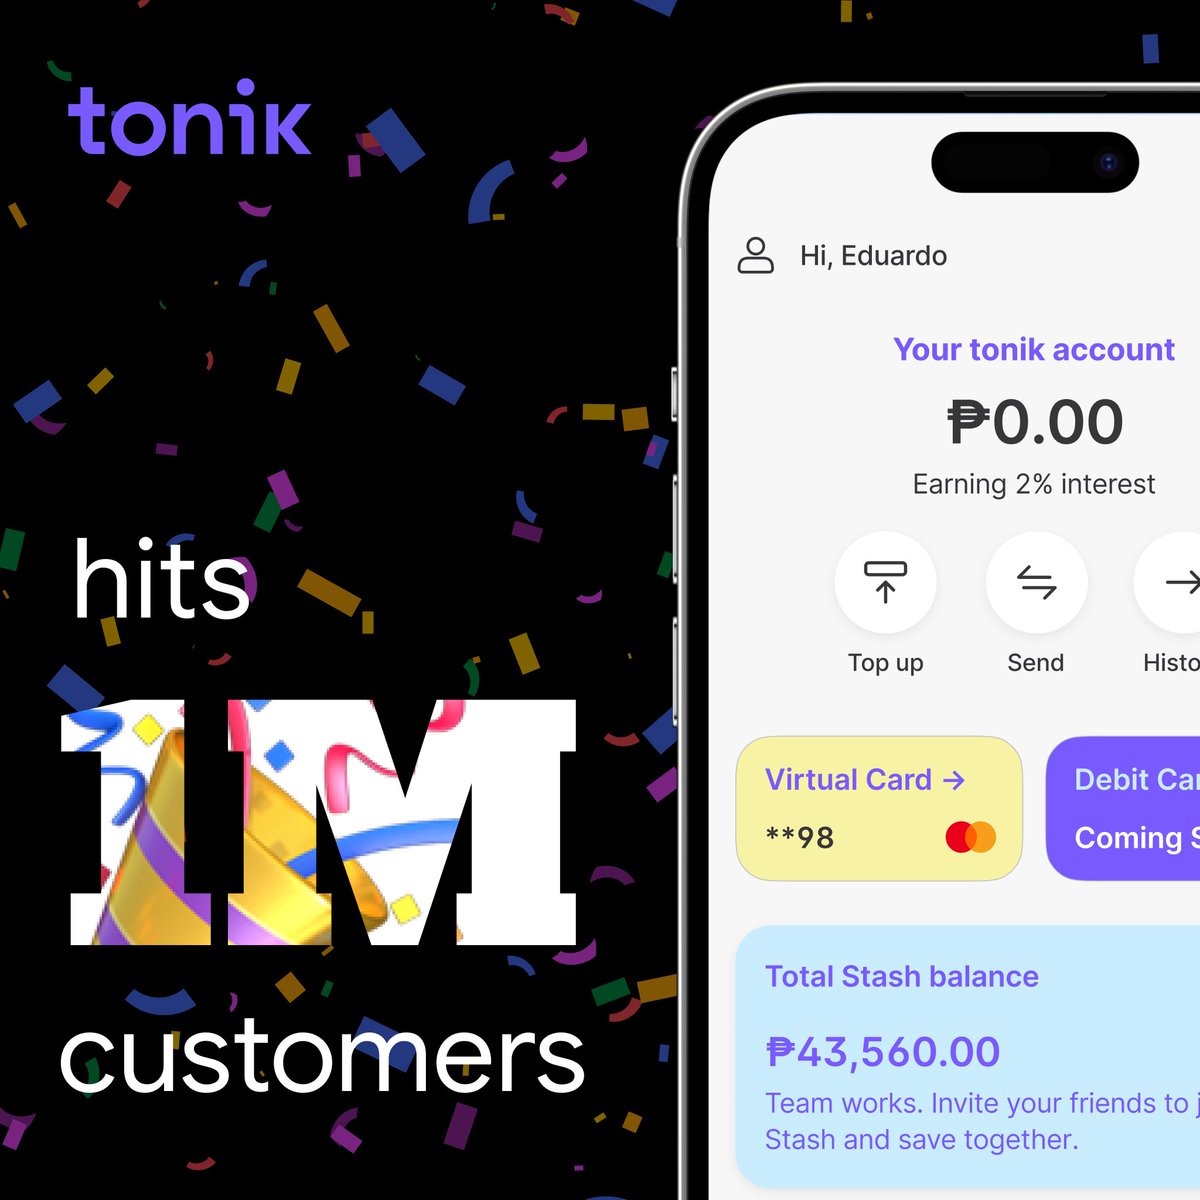 It is officially!
Now I'm providing UX services for 1 million users 🎉

tonikbank.com/news/tonik-hit…

#UX #UXDESIGN #UXD
#uxdesigner
#userinterface
#userexperience
#userinterfacedesign
#userexperiencedesign